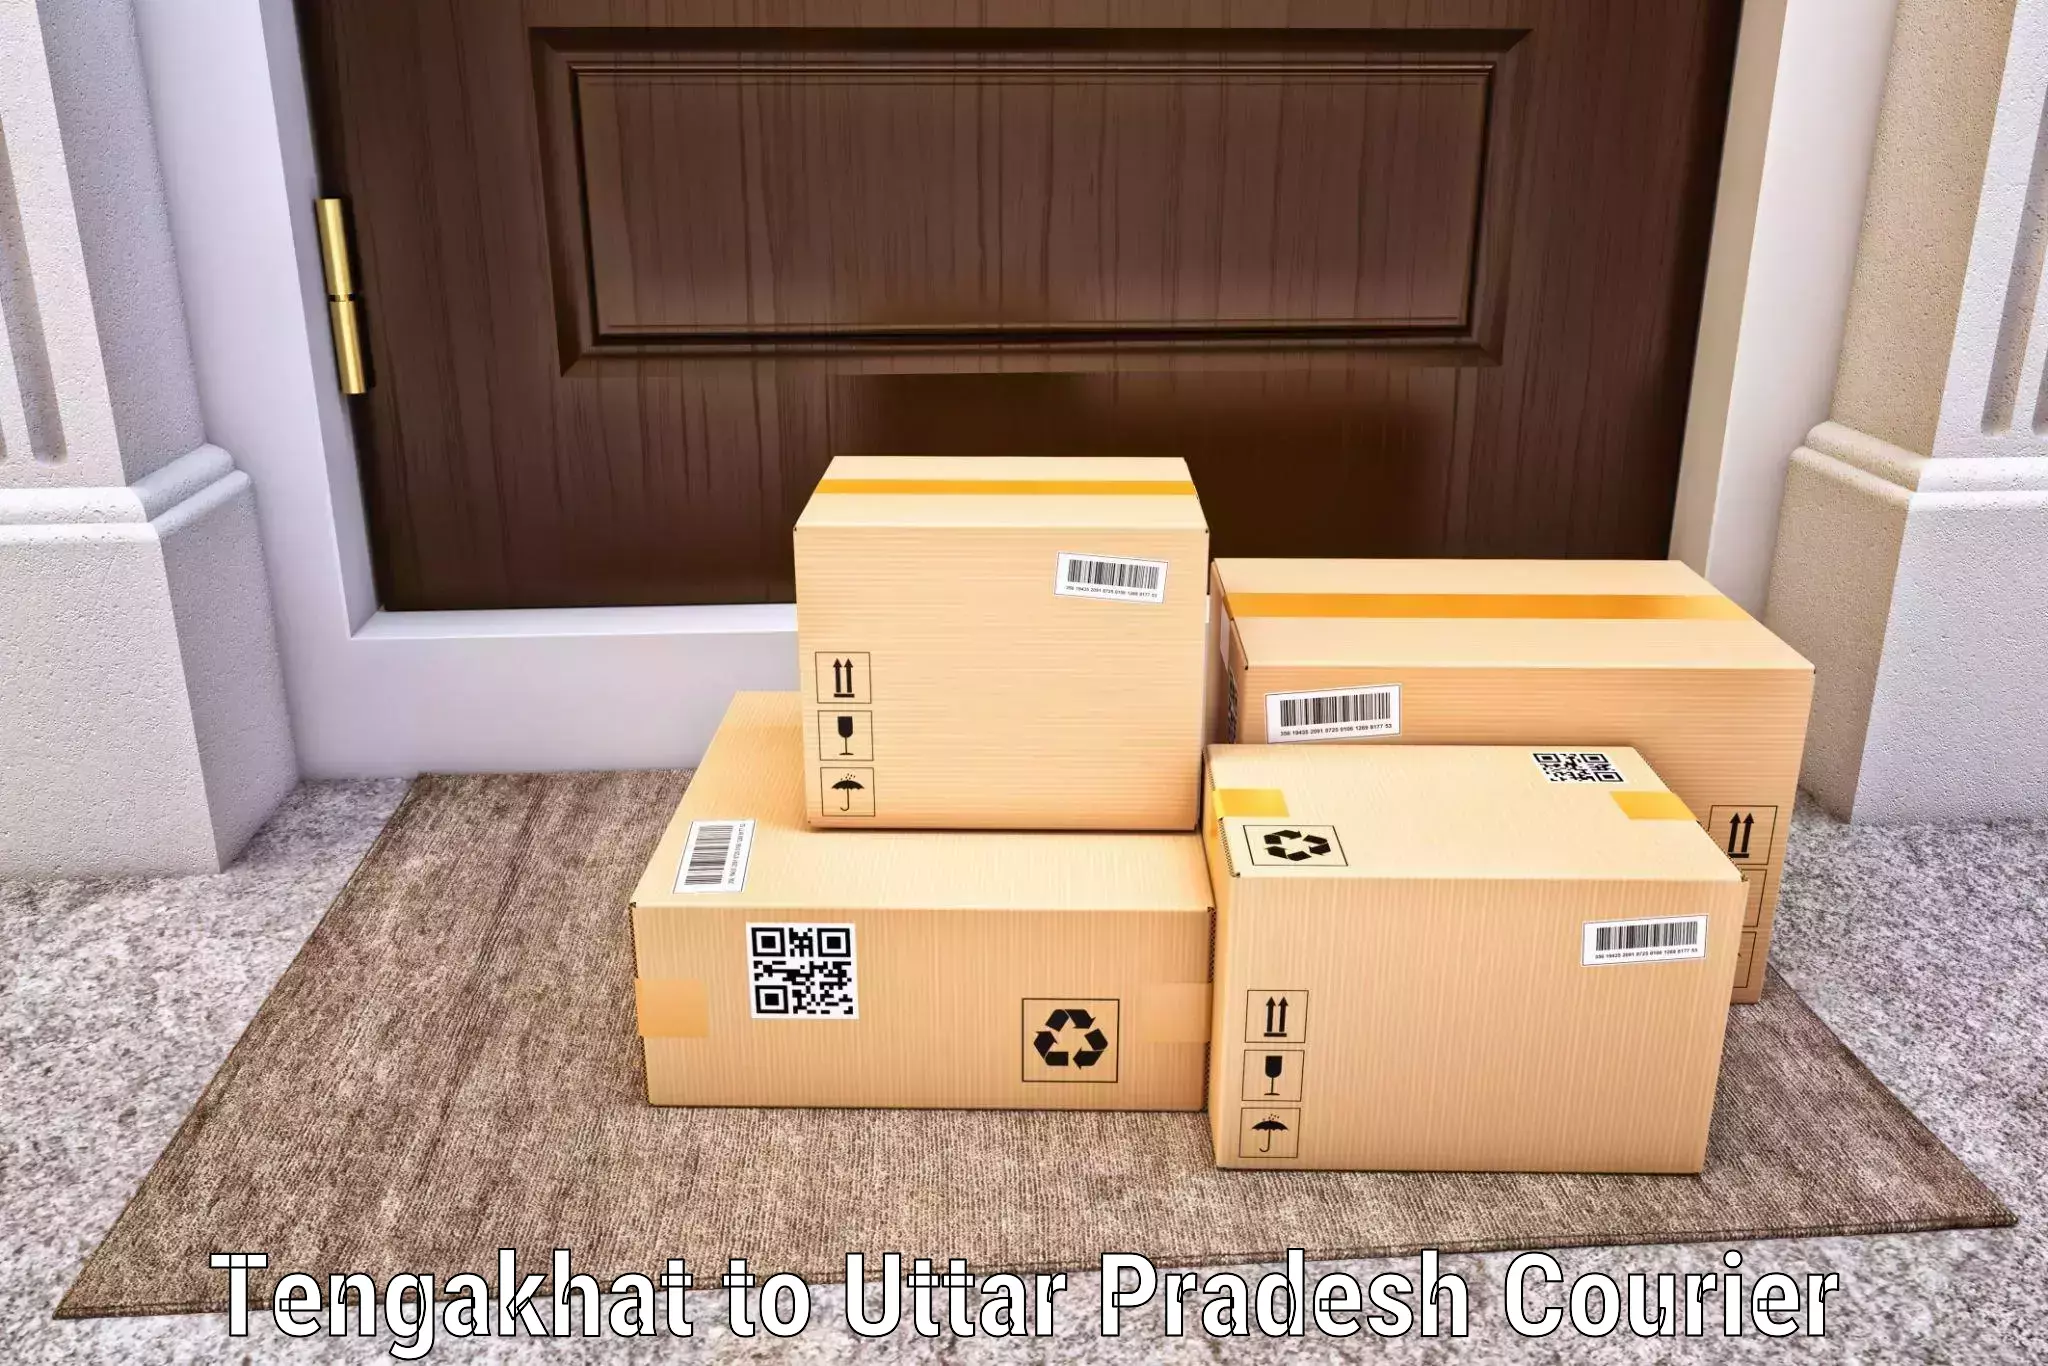 Postal and courier services Tengakhat to Lucknow